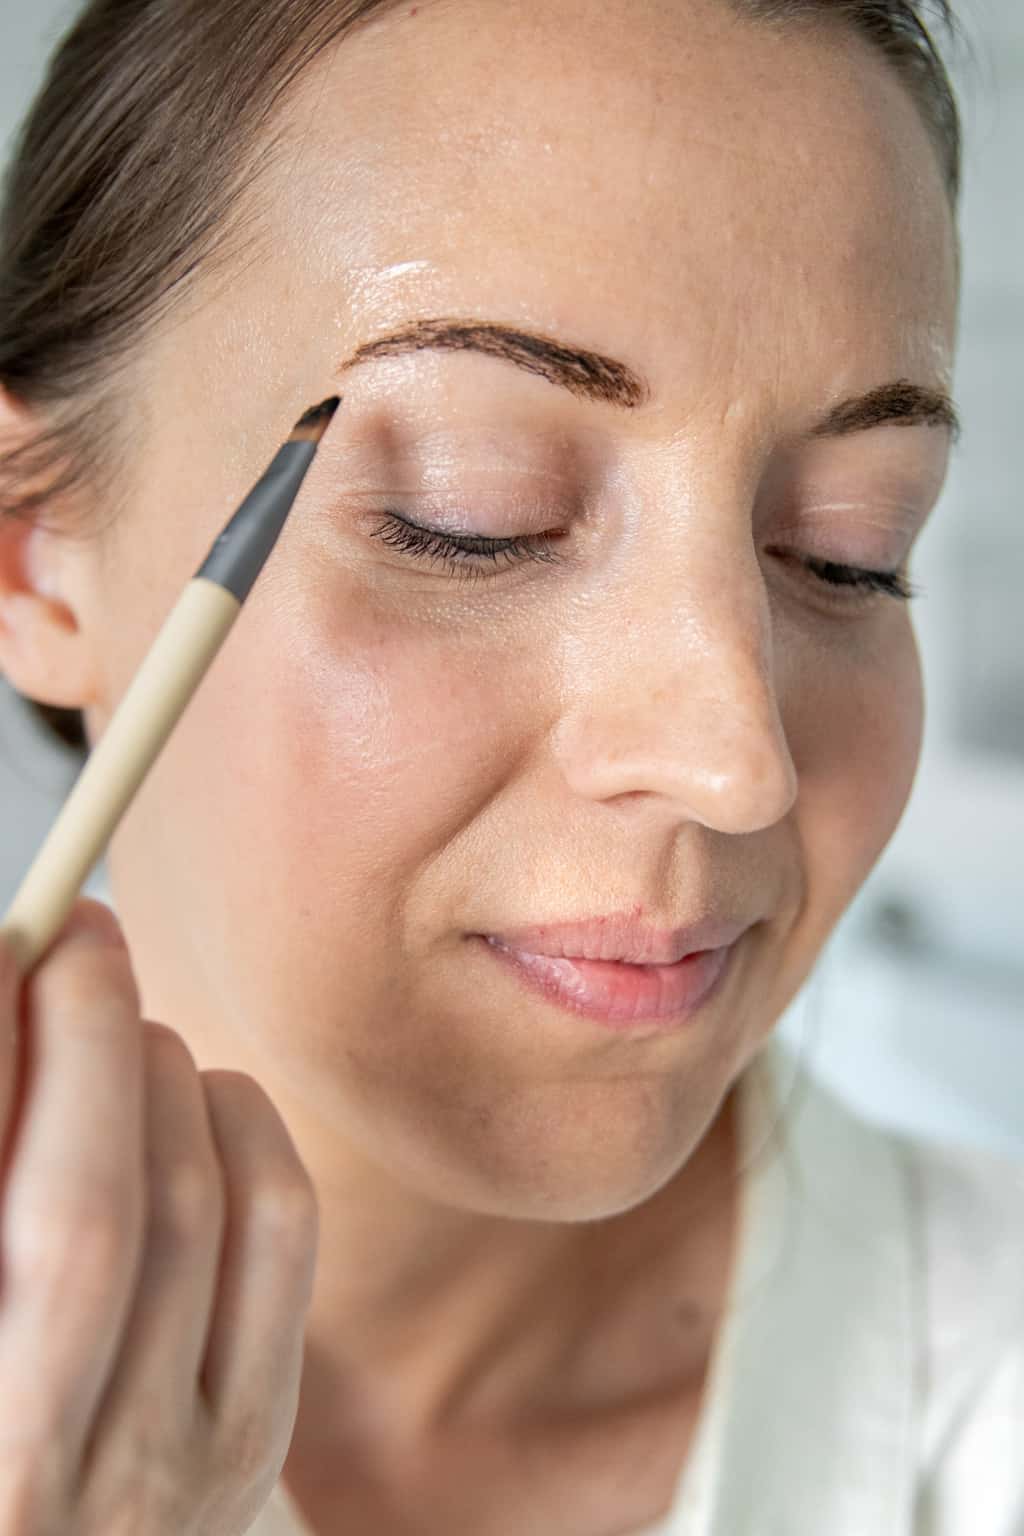 How To Tint Your Eyebrows At Home With Henna